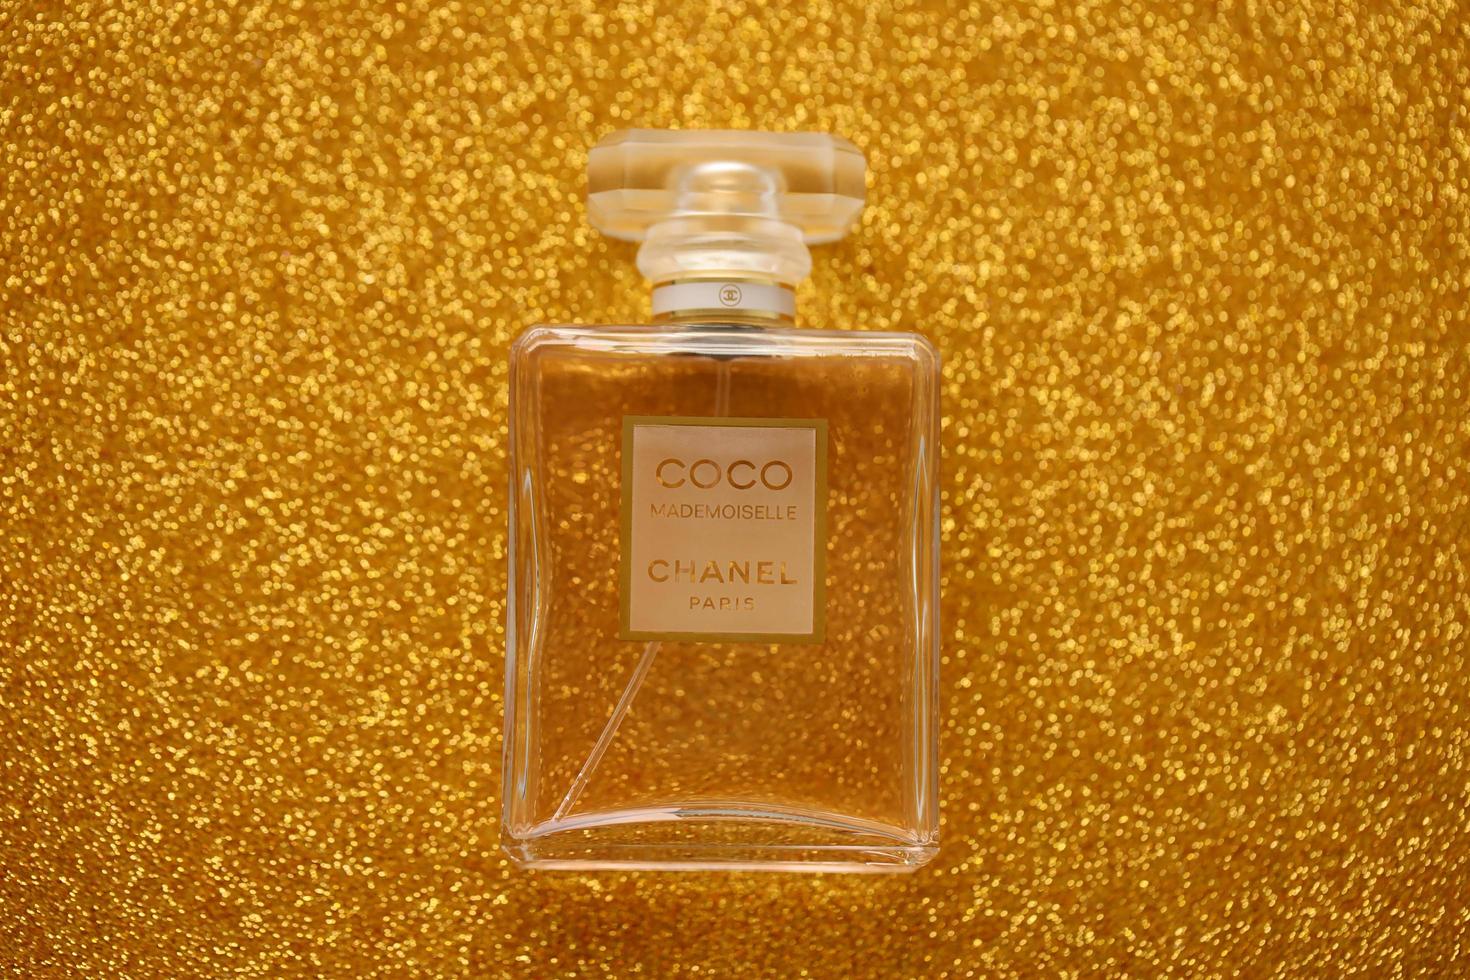 TERNOPIL, UKRAINE - SEPTEMBER 2, 2022 Coco Mademoiselle Chanel Paris  worldwide famous french perfume bottle on shiny glitter background in  golden colors 13250081 Stock Photo at Vecteezy